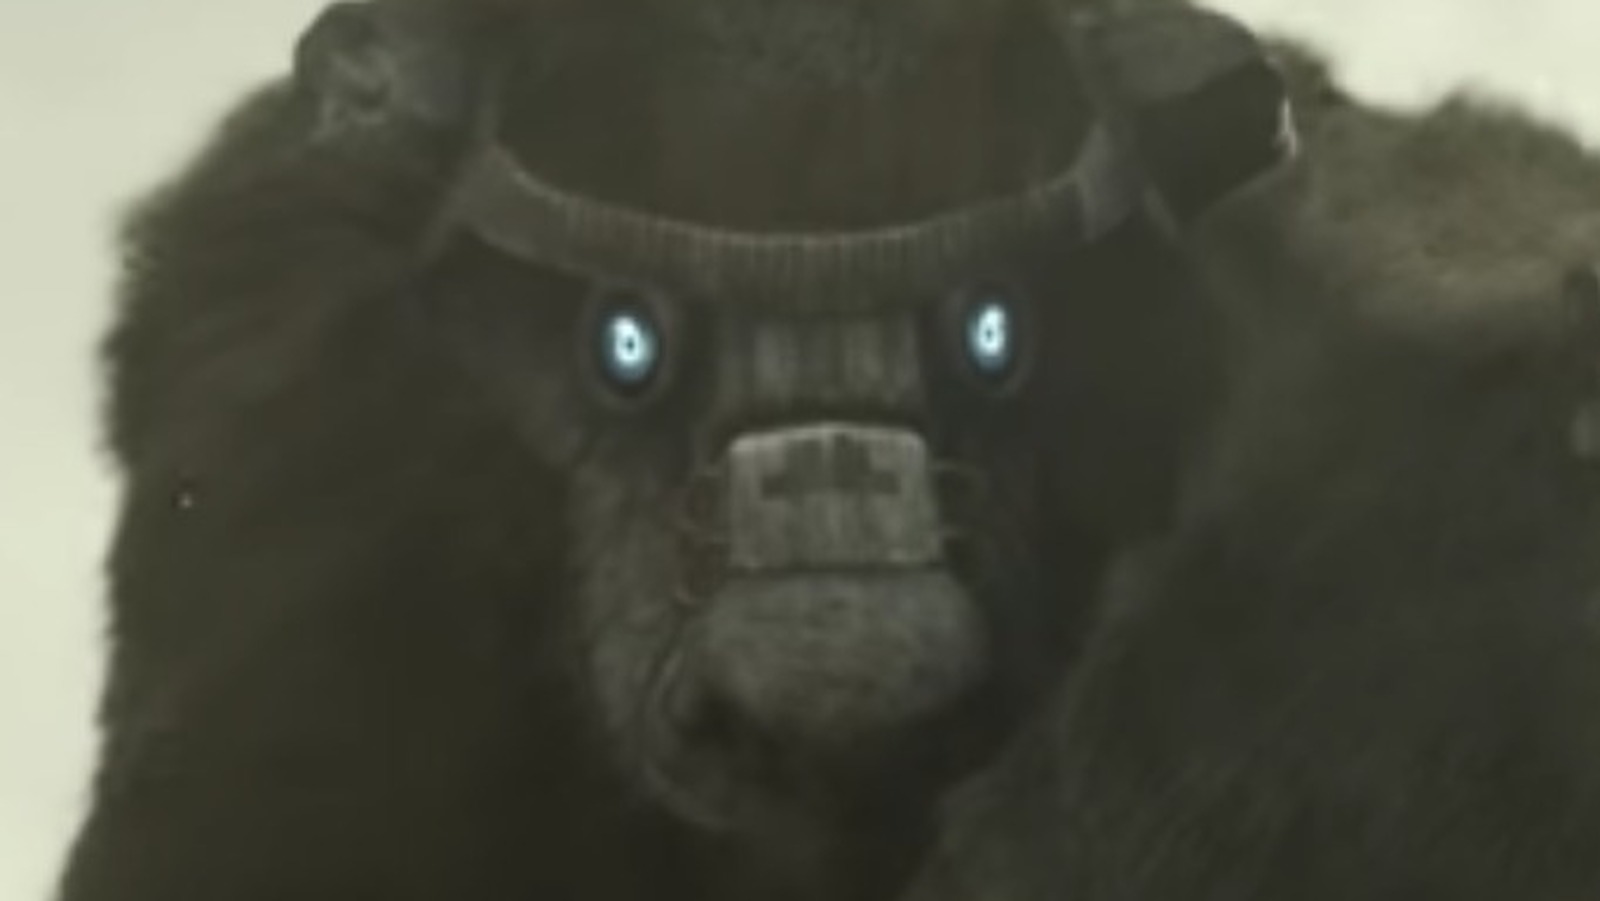 How long is Shadow of the Colossus?